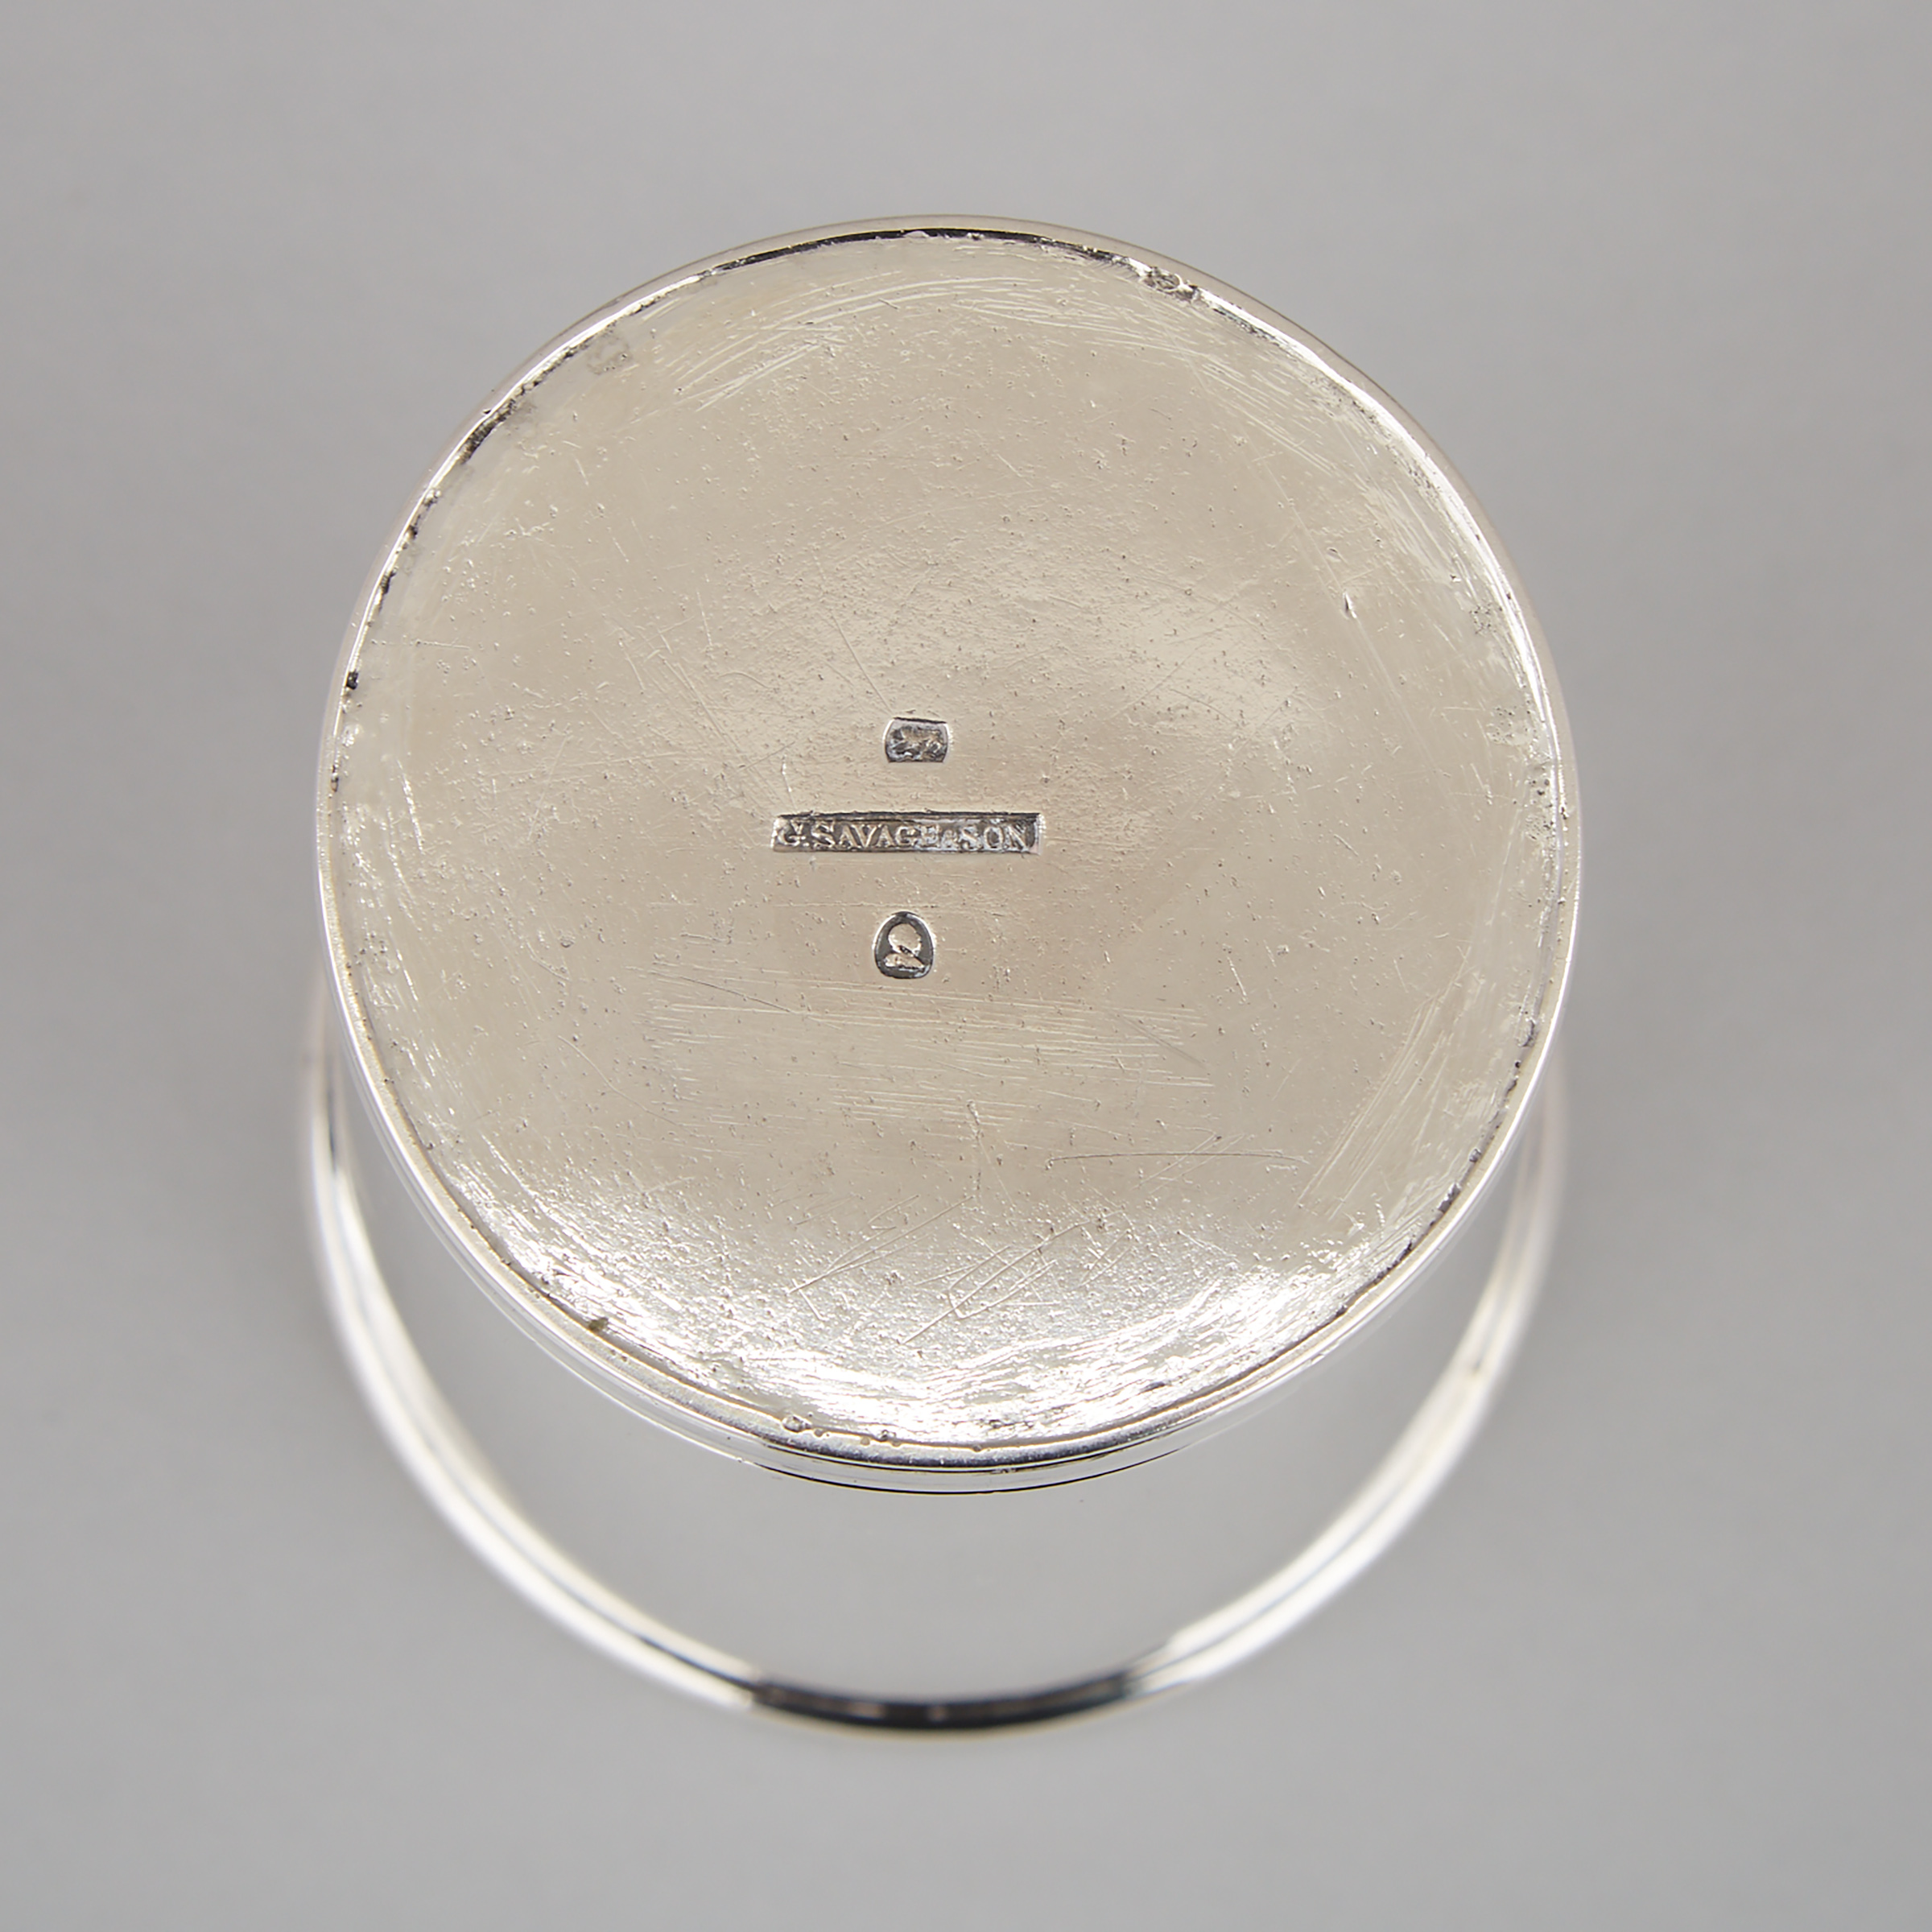 Canadian Silver Beaker, George Savage & Son, Montreal, Que., c.1829-43